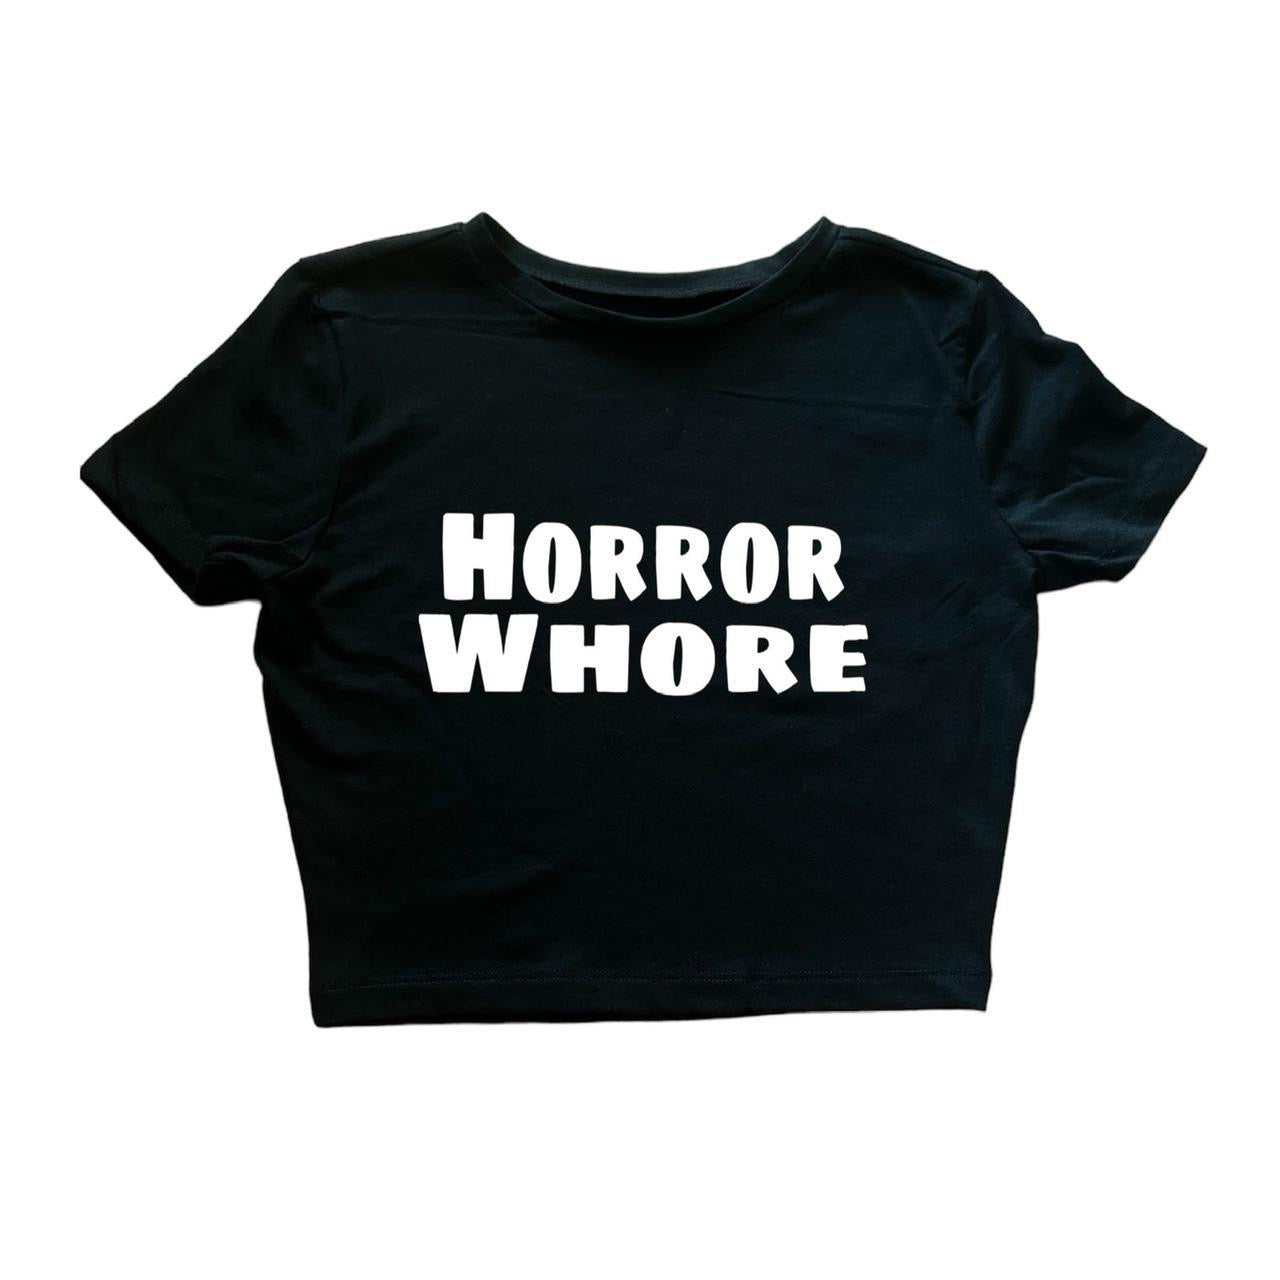 Horror whore cropped baby tee